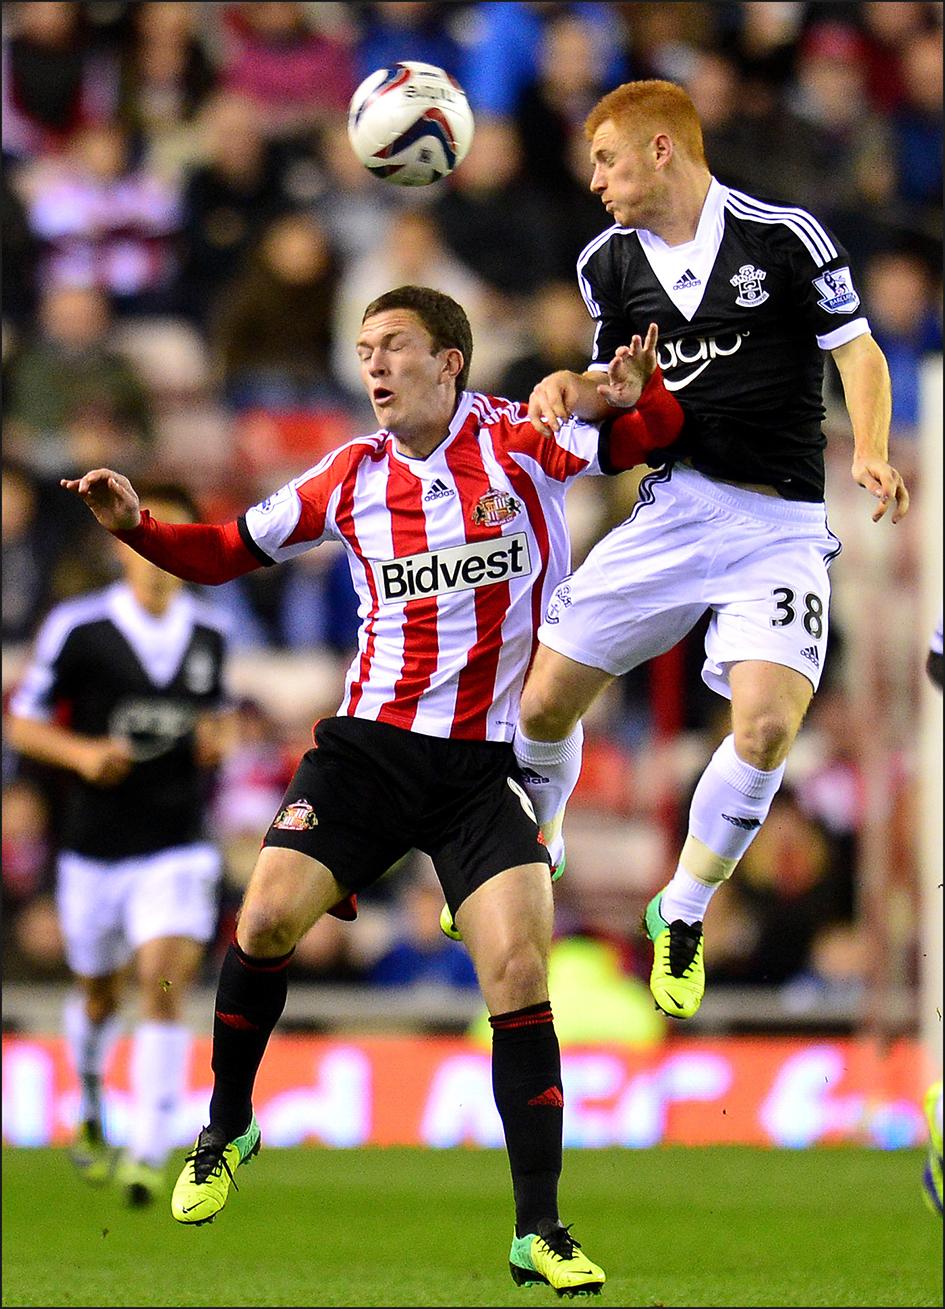 Picture from the Capital One Cup clash between Sunderland and Saints at the Stadium of Light. The unauthorised downloading, editing, copying, or distribution of this image is strictly prohibited.